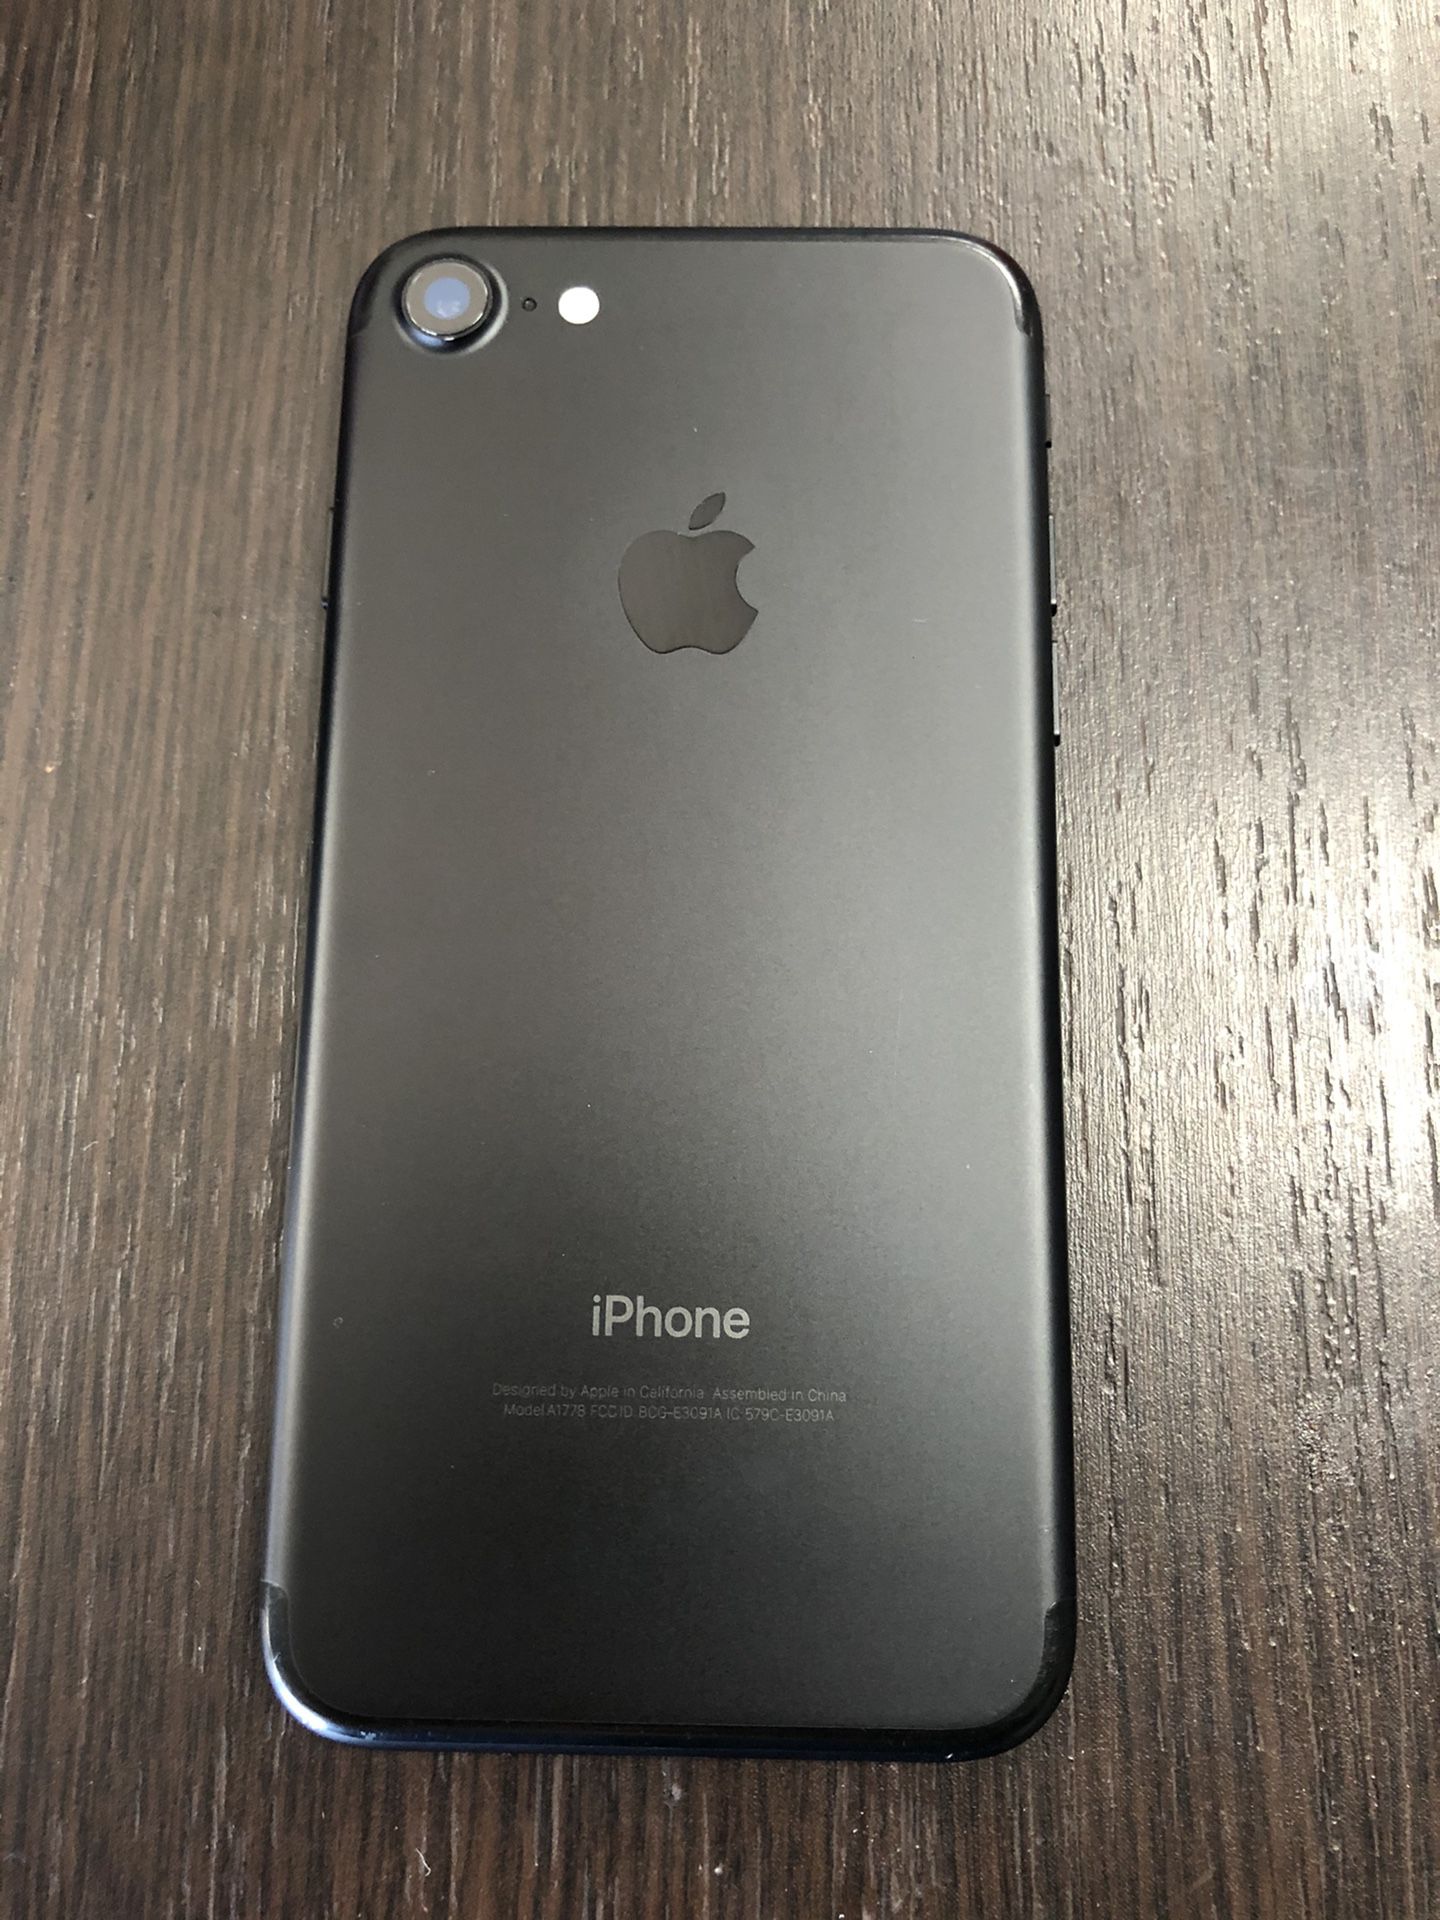 Black iPhone 7 for T-Mobile network